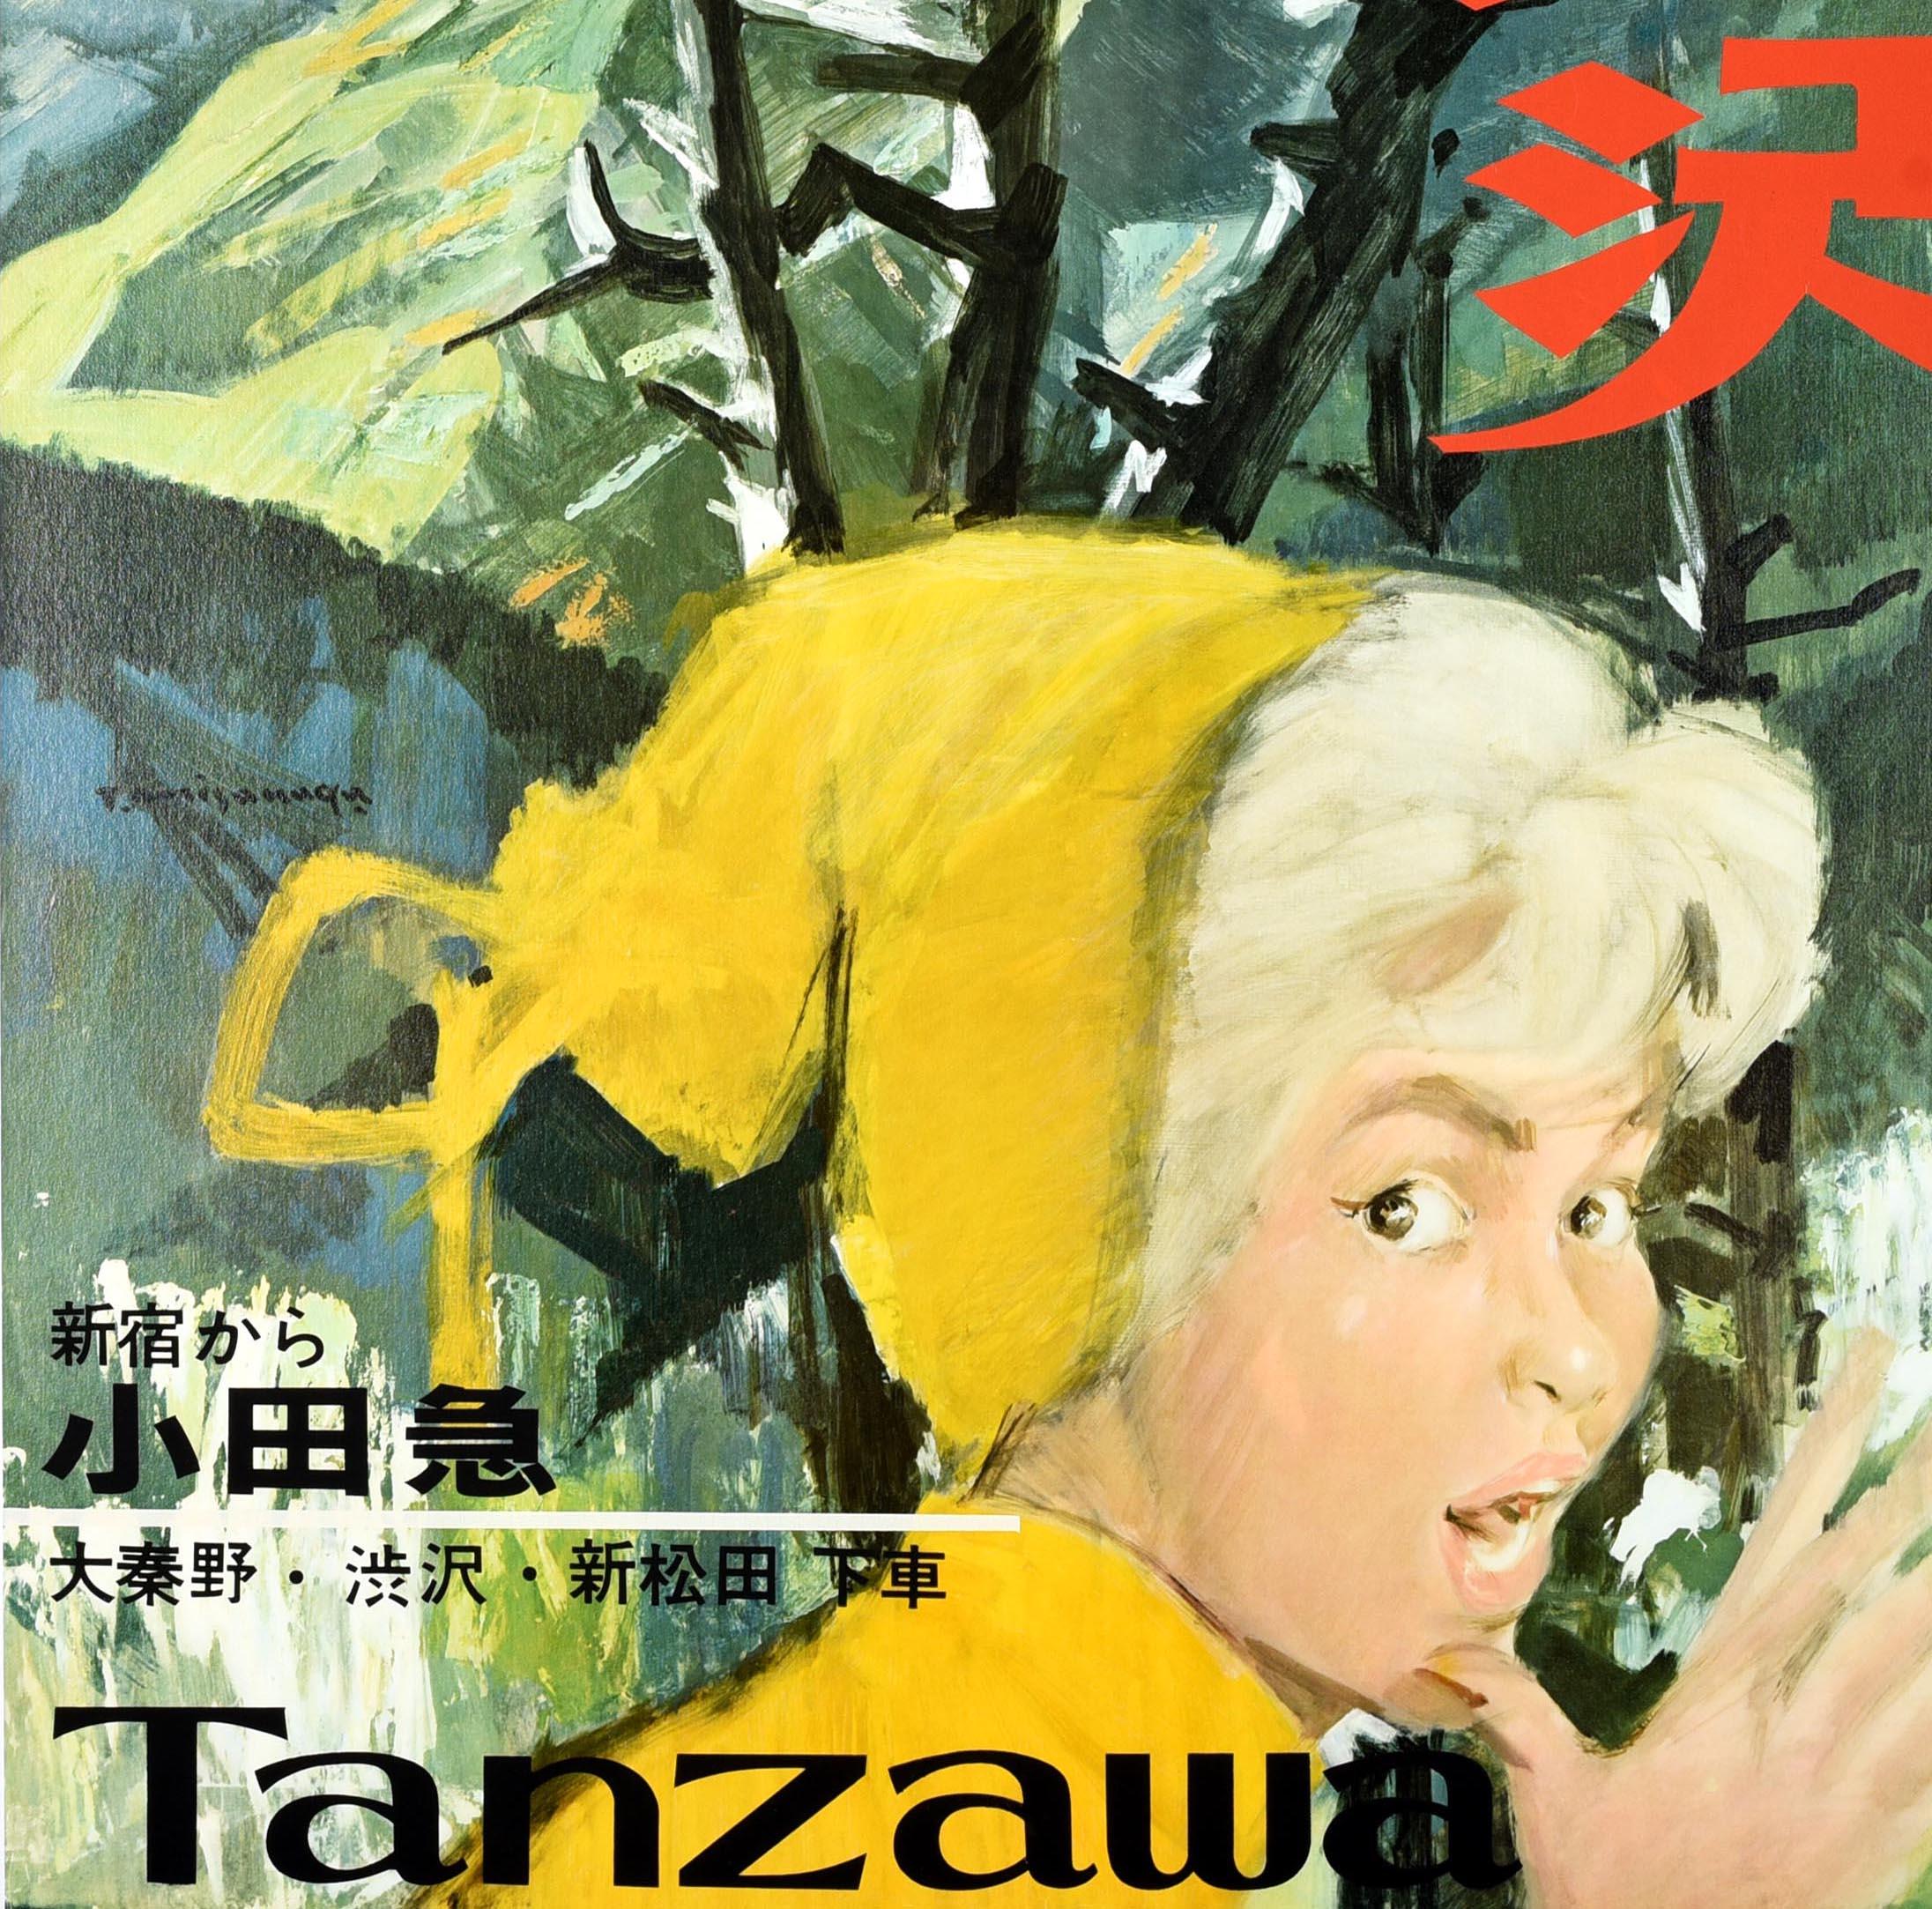 Original vintage travel poster for the Tanzawa Mountains National Park in the Kanto region of Japan - From Shinjuku to Odakyu get off at Hadano, Shibusawa and Shin-Matsuda - featuring a lady looking back in surprise at the viewer with a tree and